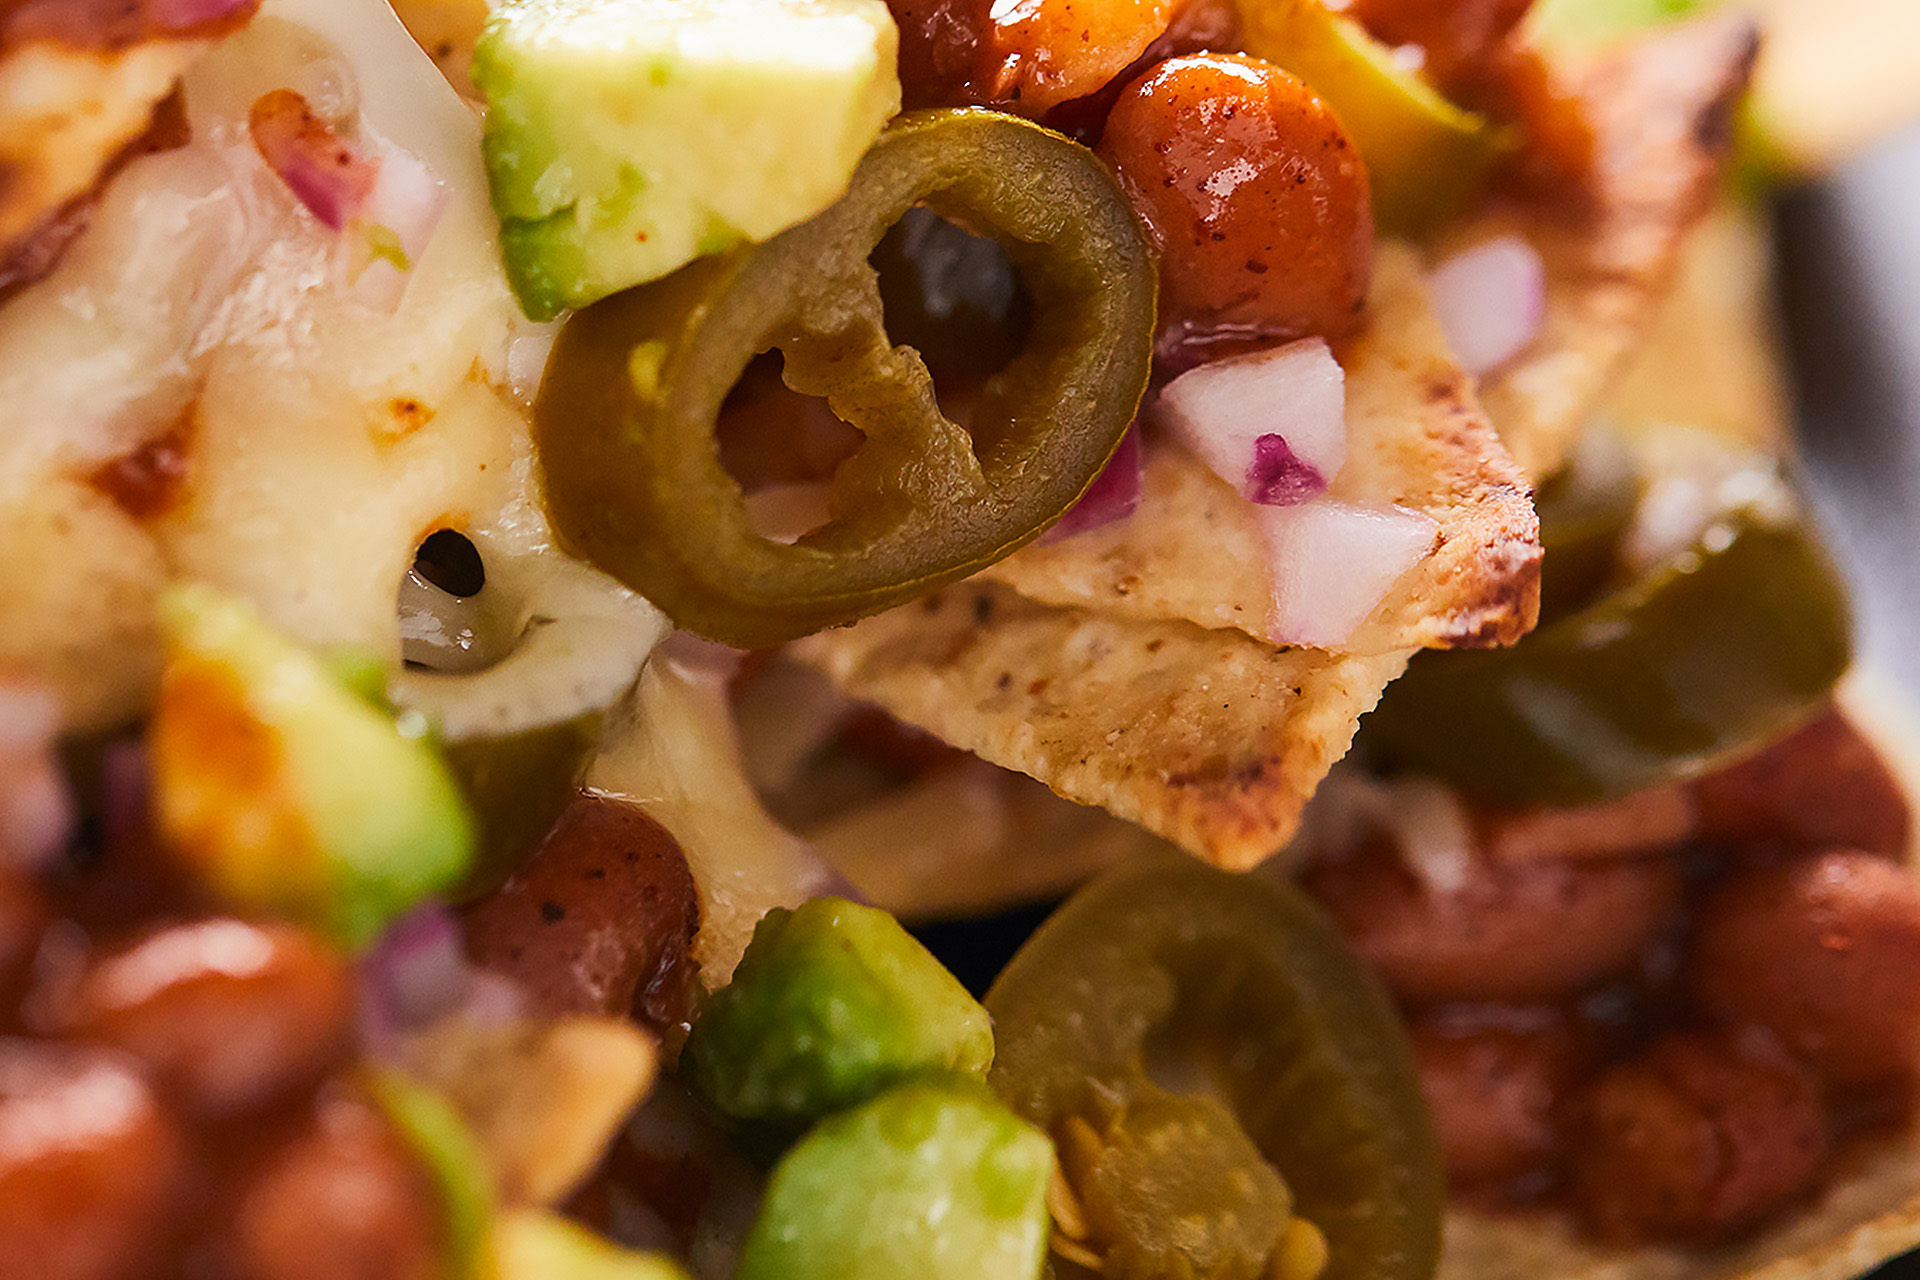 An extreme close-up of nachos with melted cheese, beans and sliced jalapenos